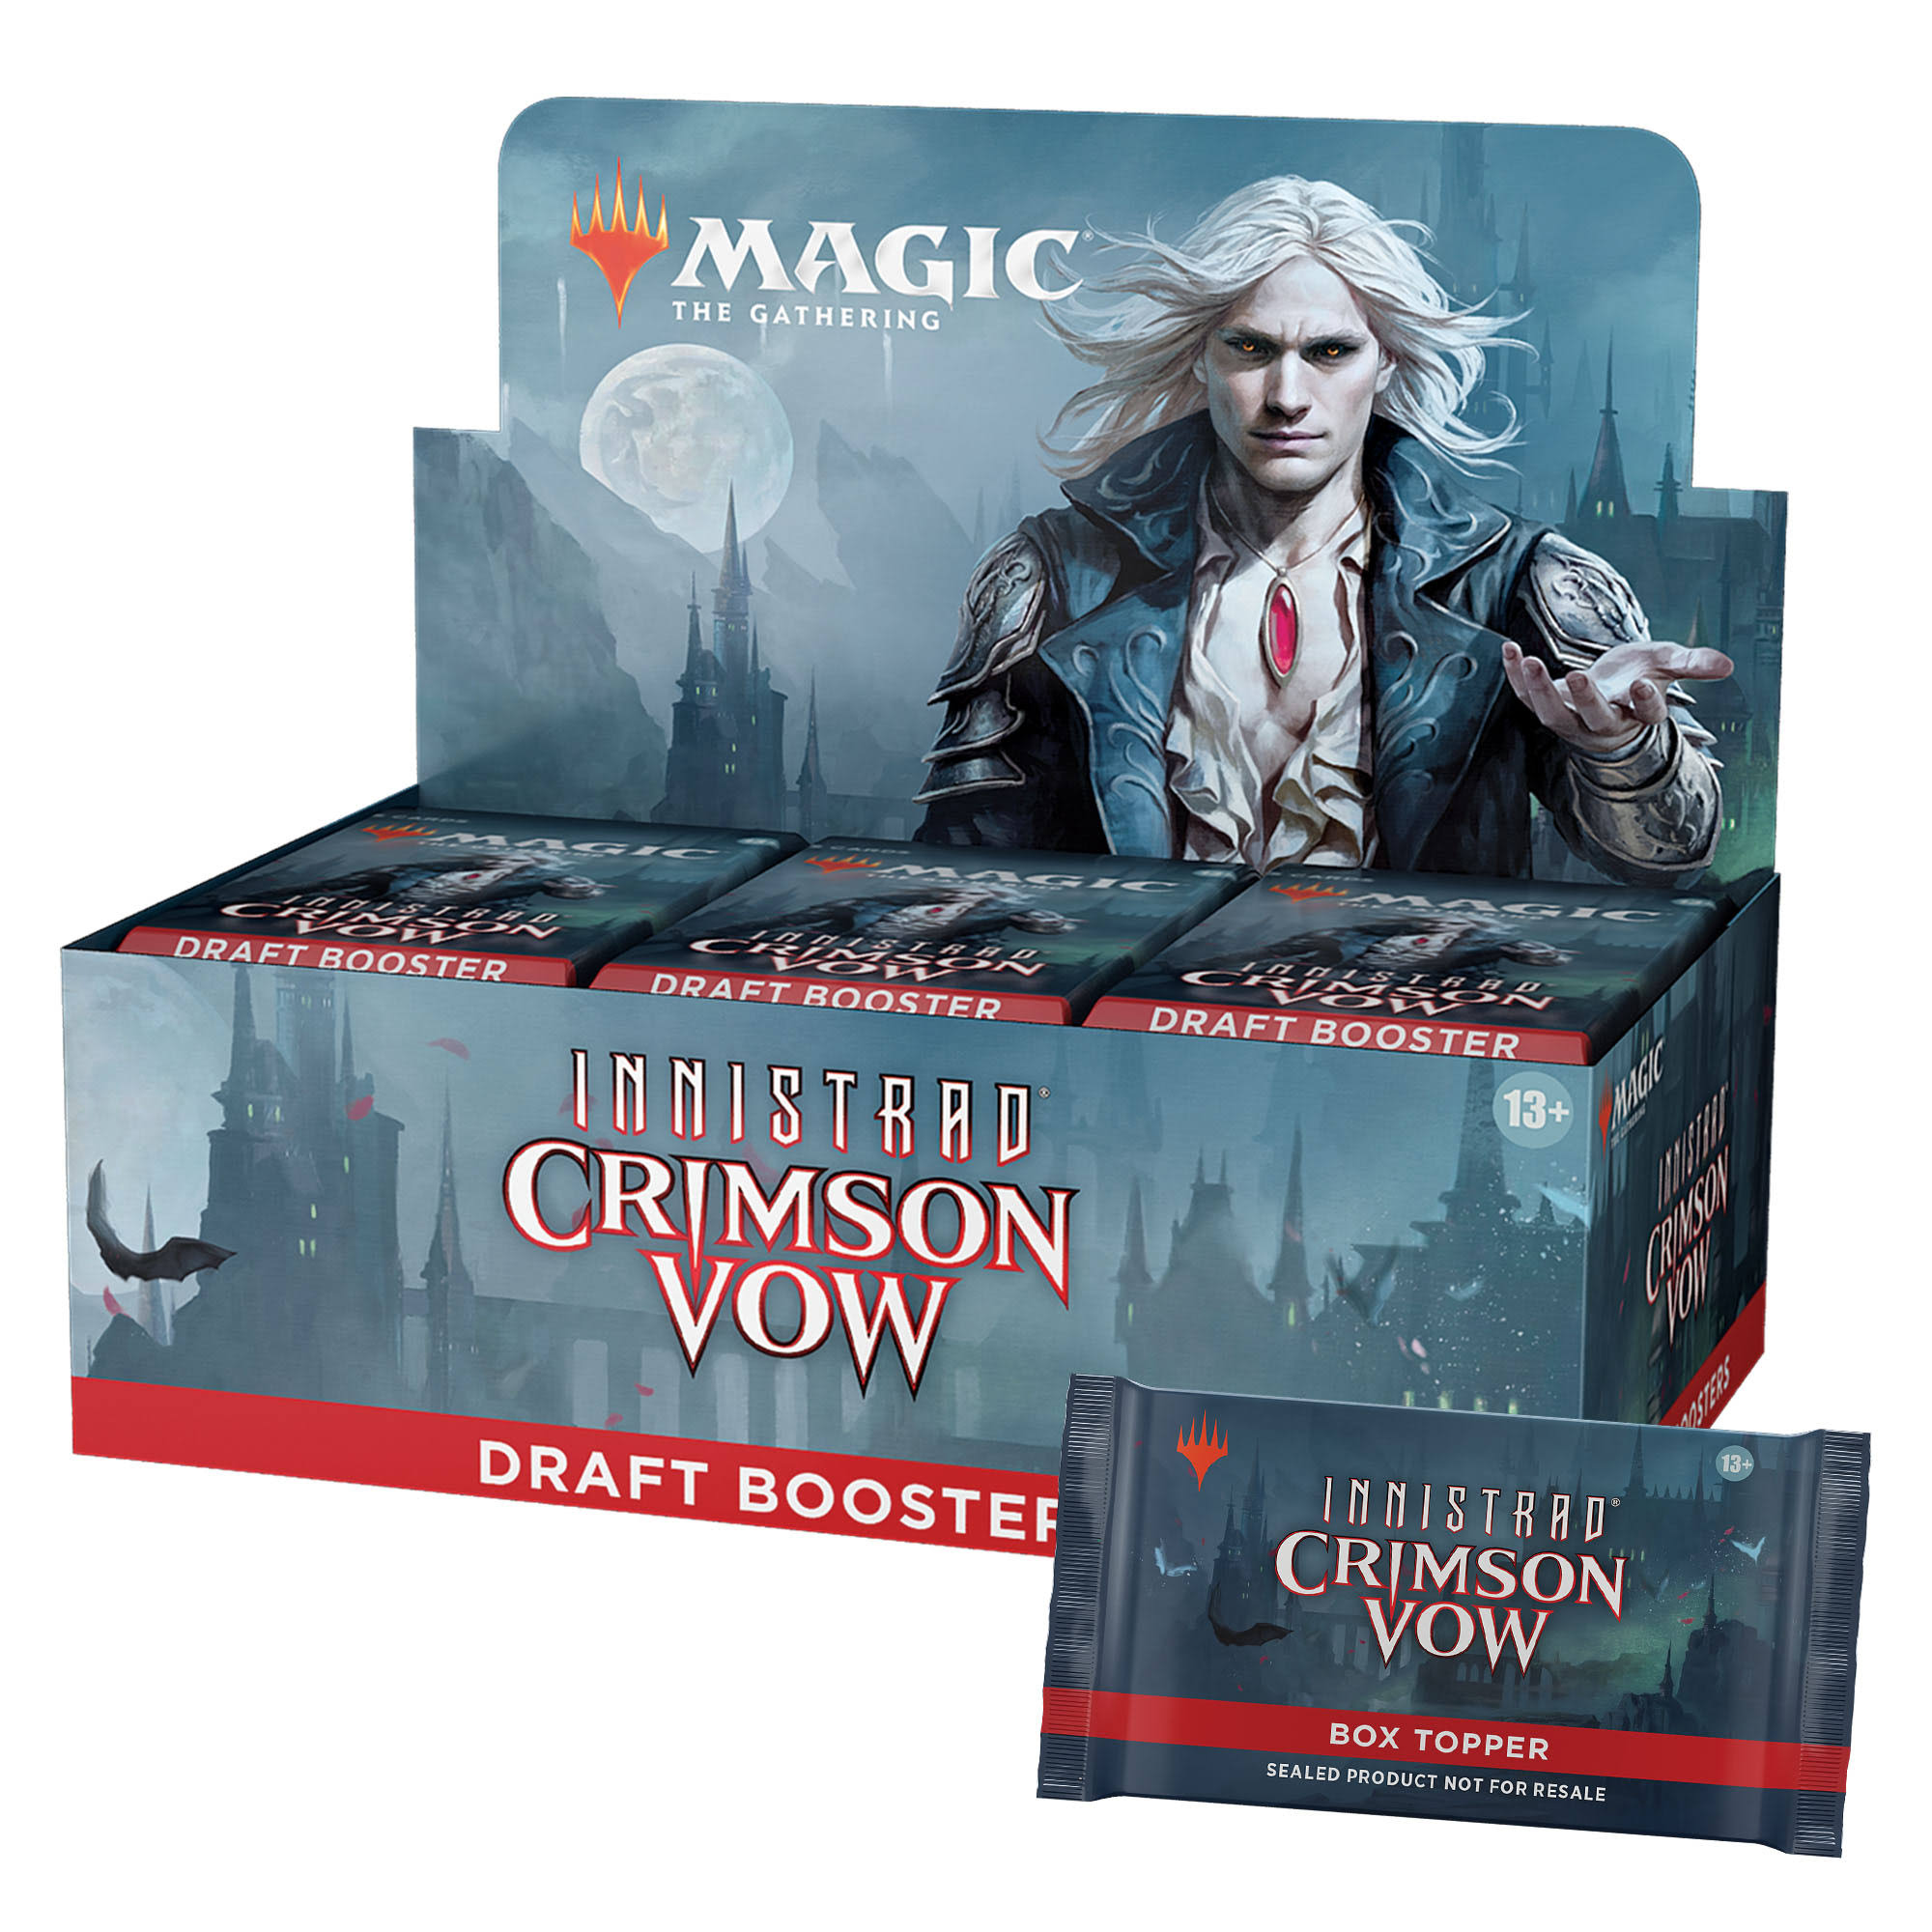 Magic the Gathering: Innistrad Crimson Vow Draft Booster Box